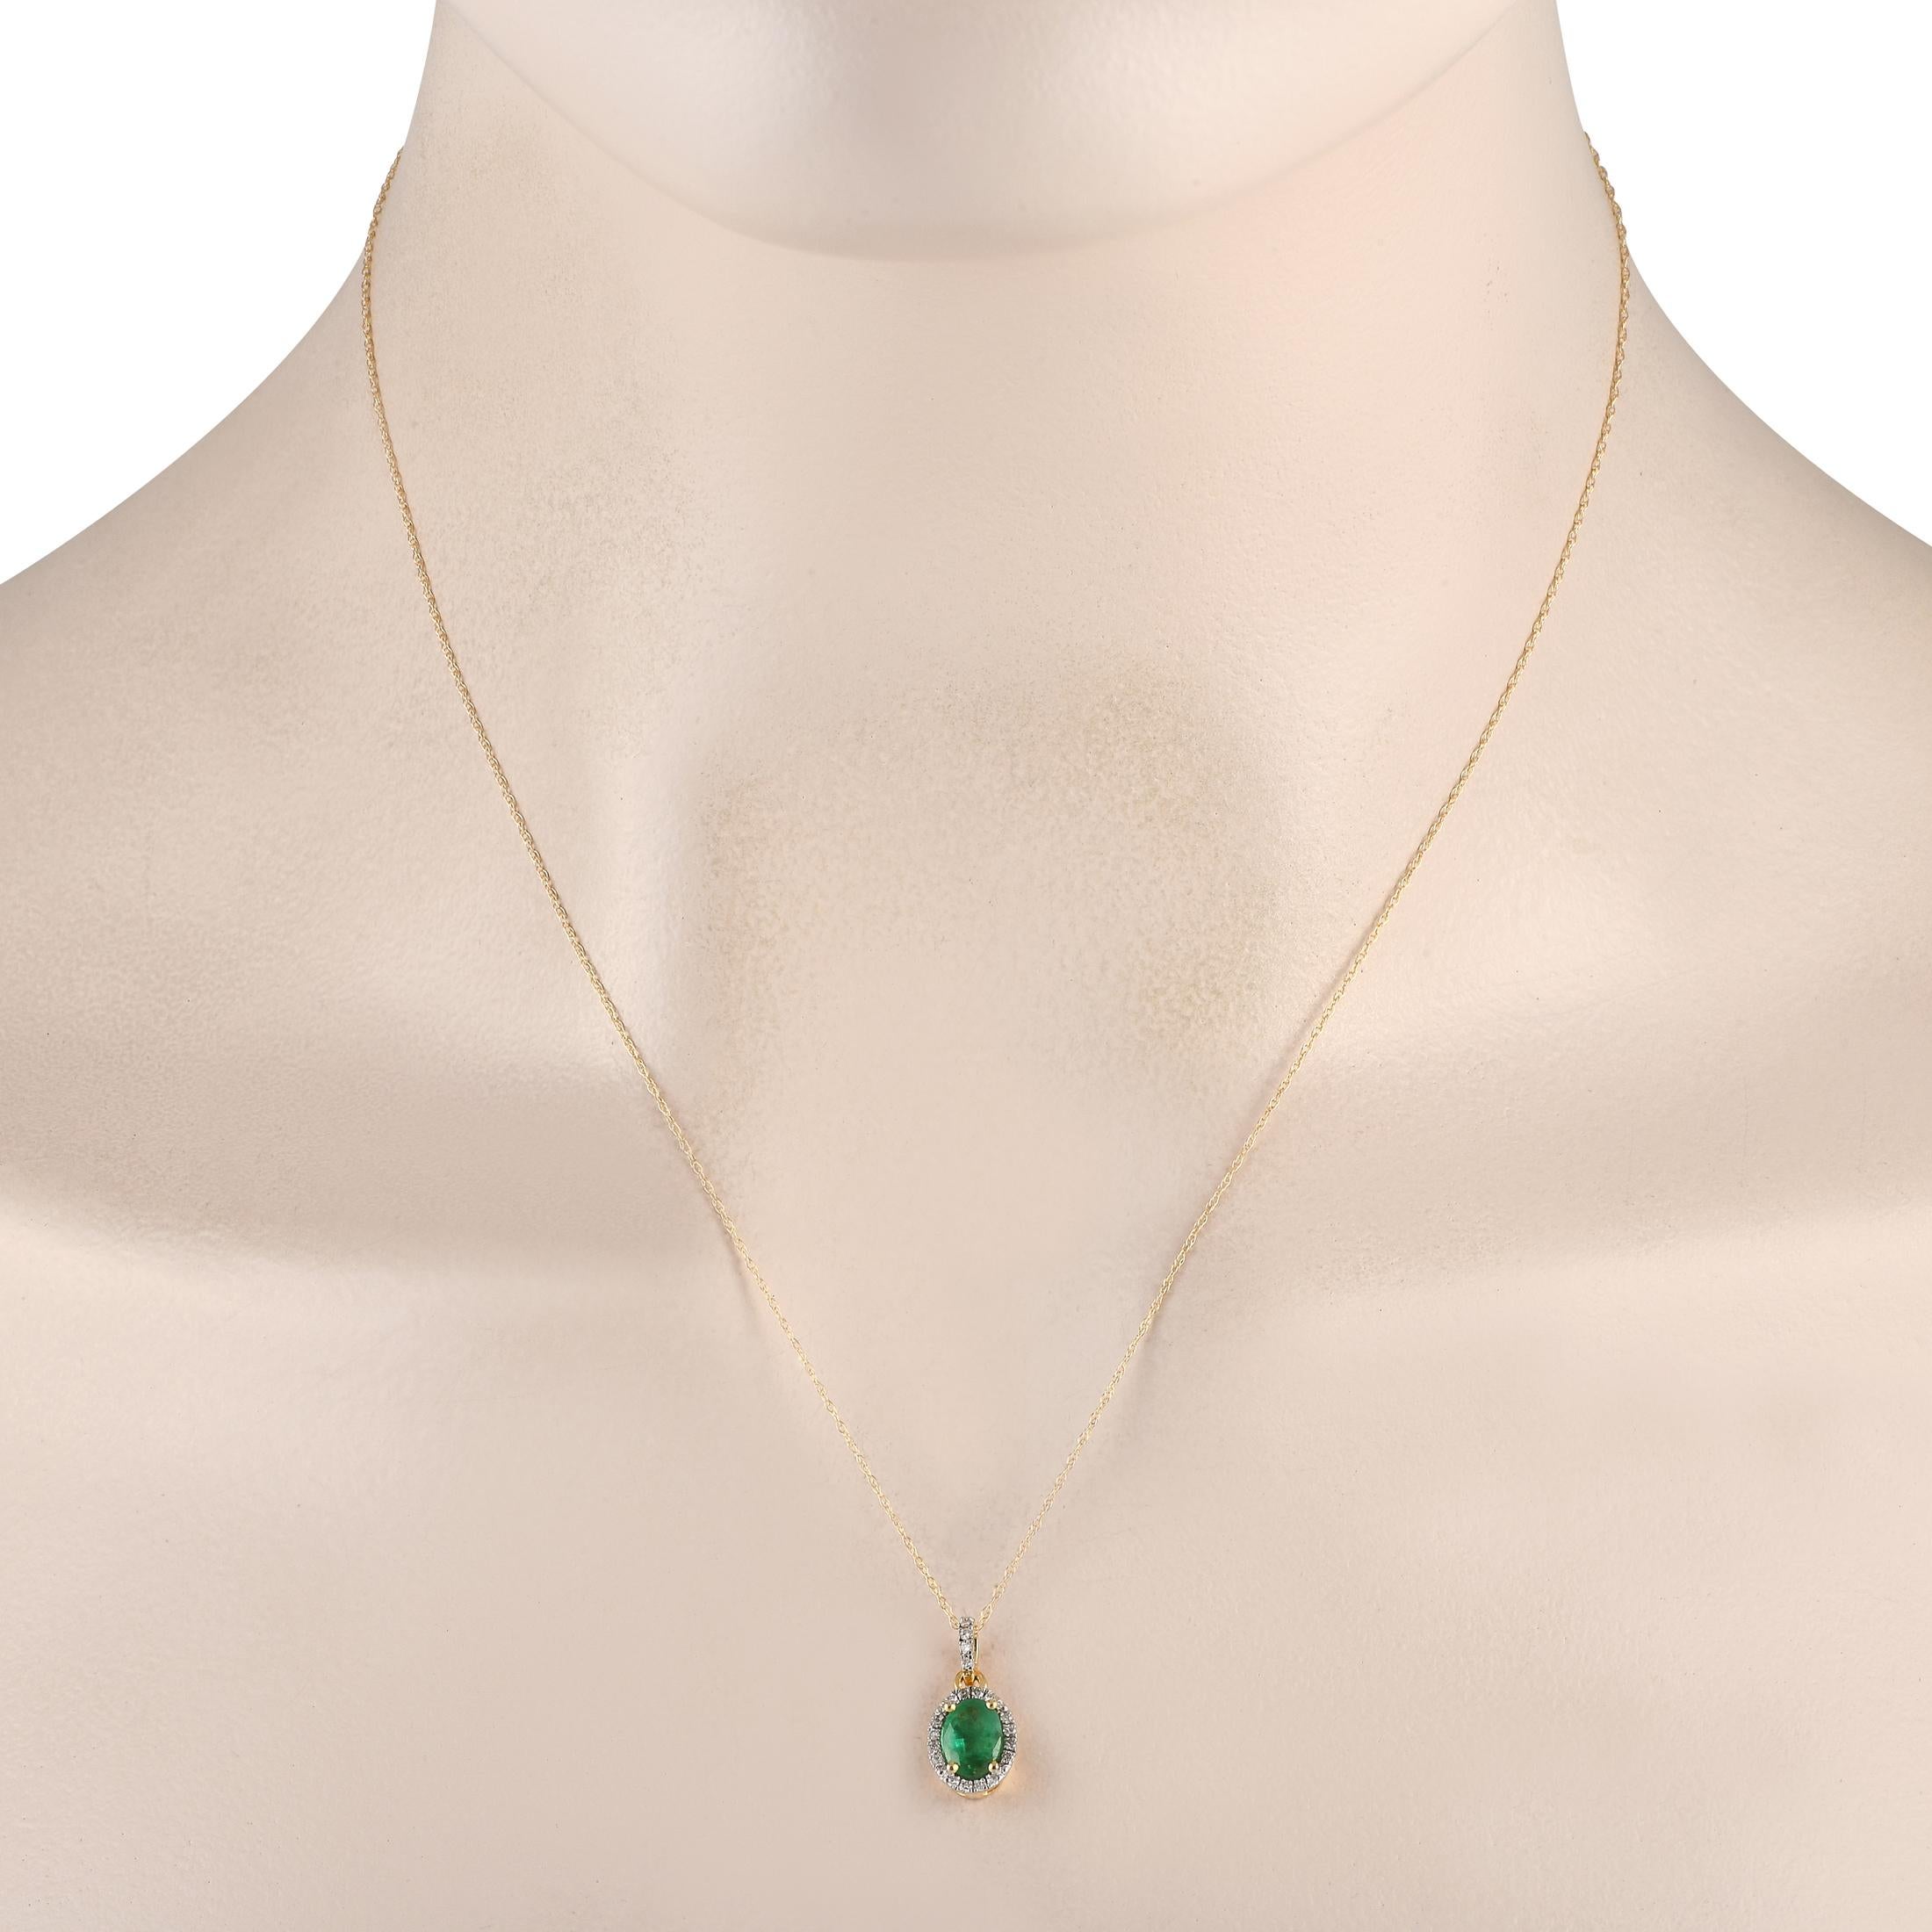 Sparkling Diamonds with a total weight of 0.06 carats highlight a beautiful oval-cut Emerald gemstone on this sleek, sophisticated necklace. Crafted from 14K Yellow Gold, it includes a pendant measuring 0.65 long by 0.25 wide suspended from an 18